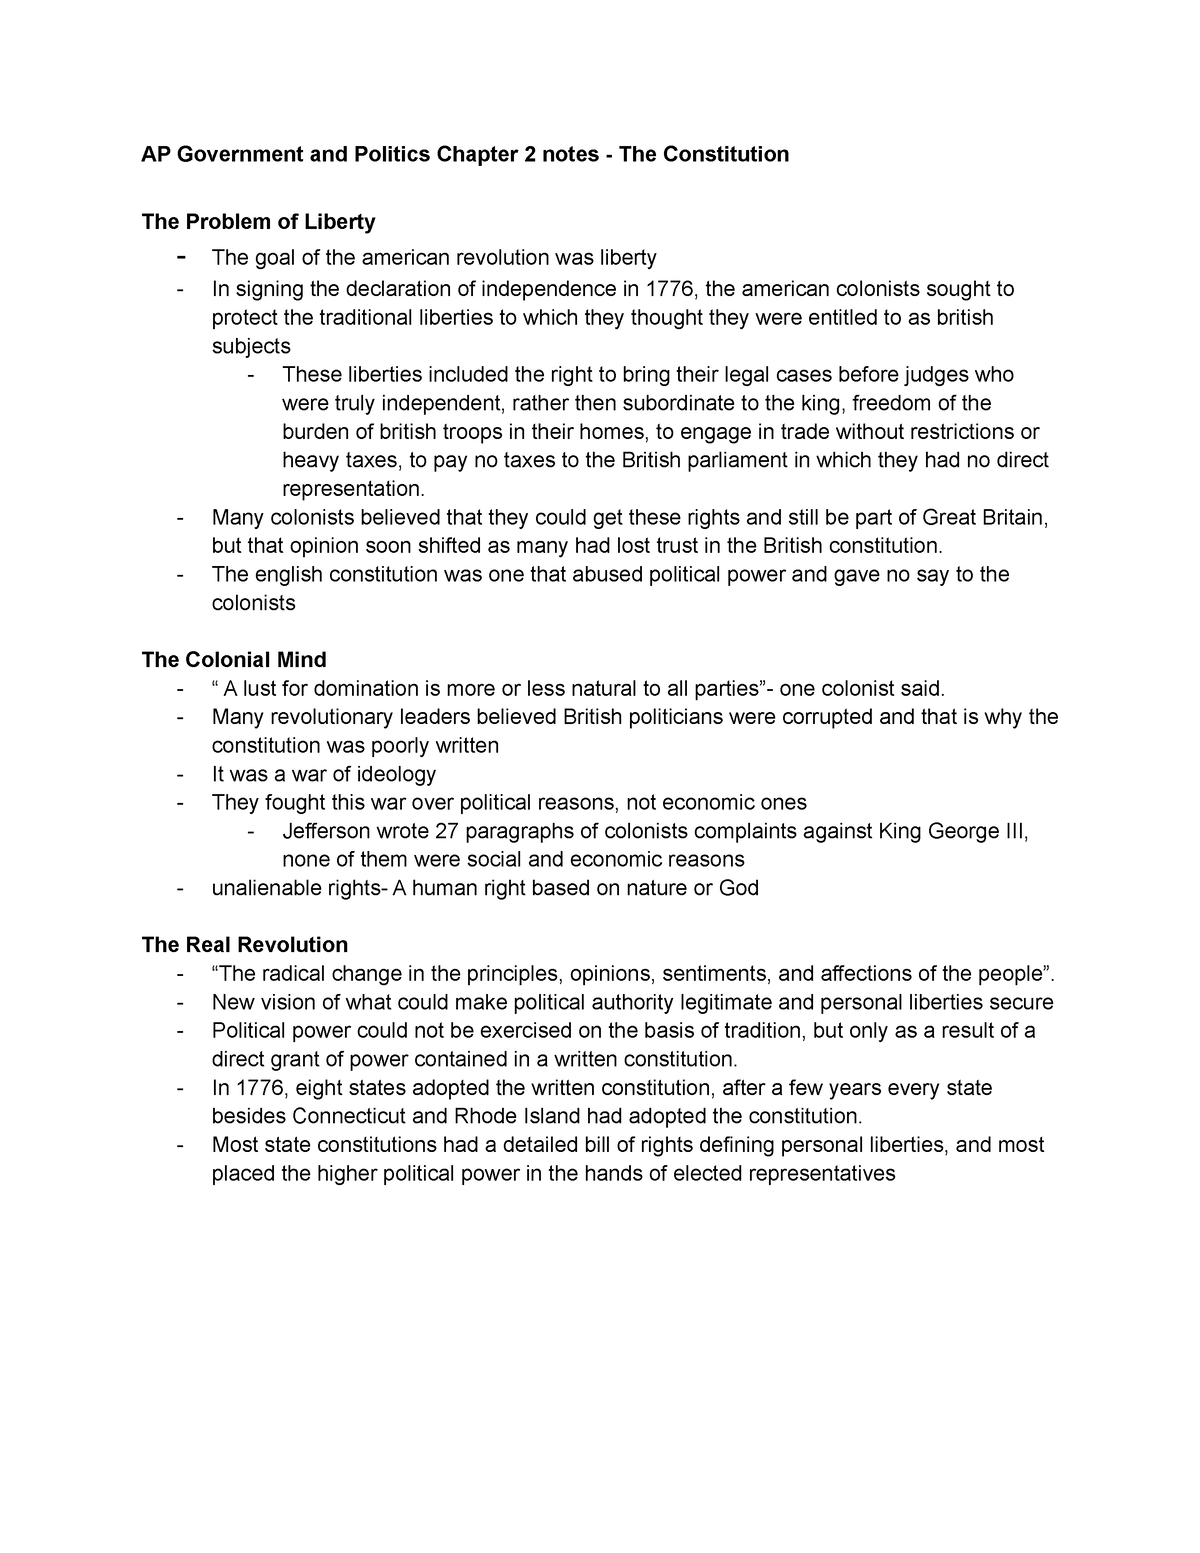 Ap Gov Chapter 2 2 Notes AP Government and Politics Chapter 2 notes